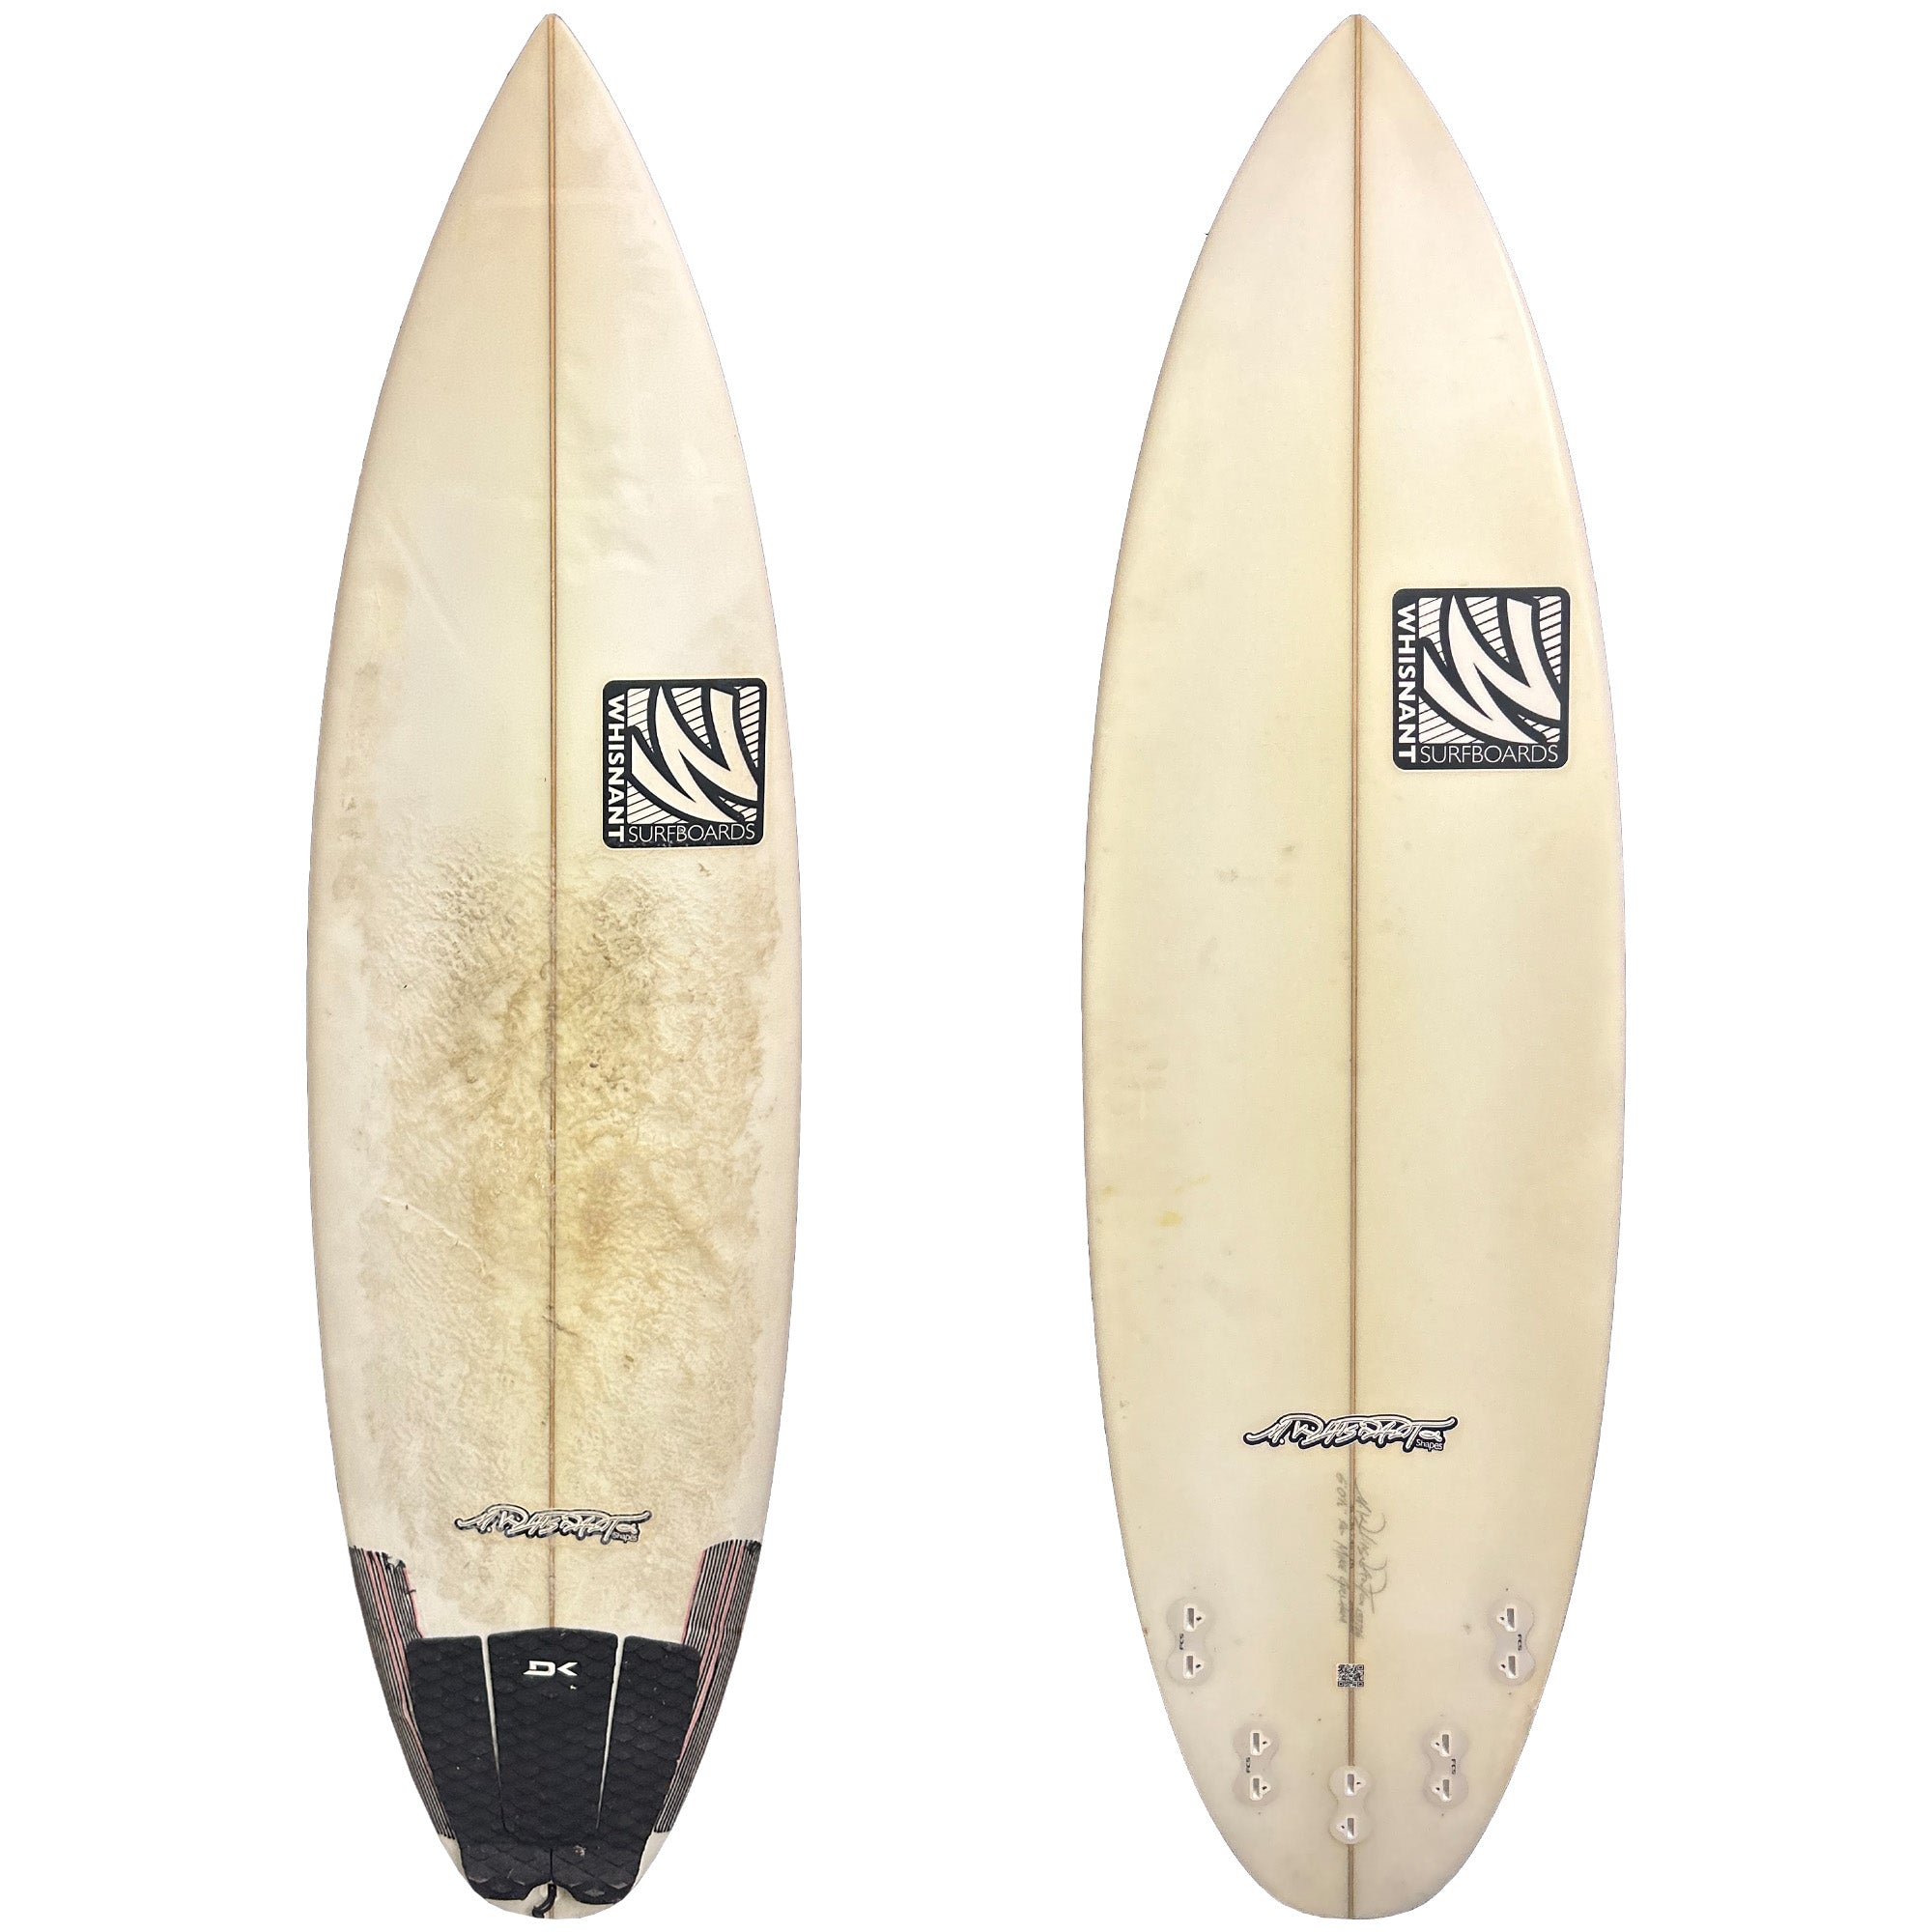 Whisnant 6'0 1/2 Consignment Surfboard